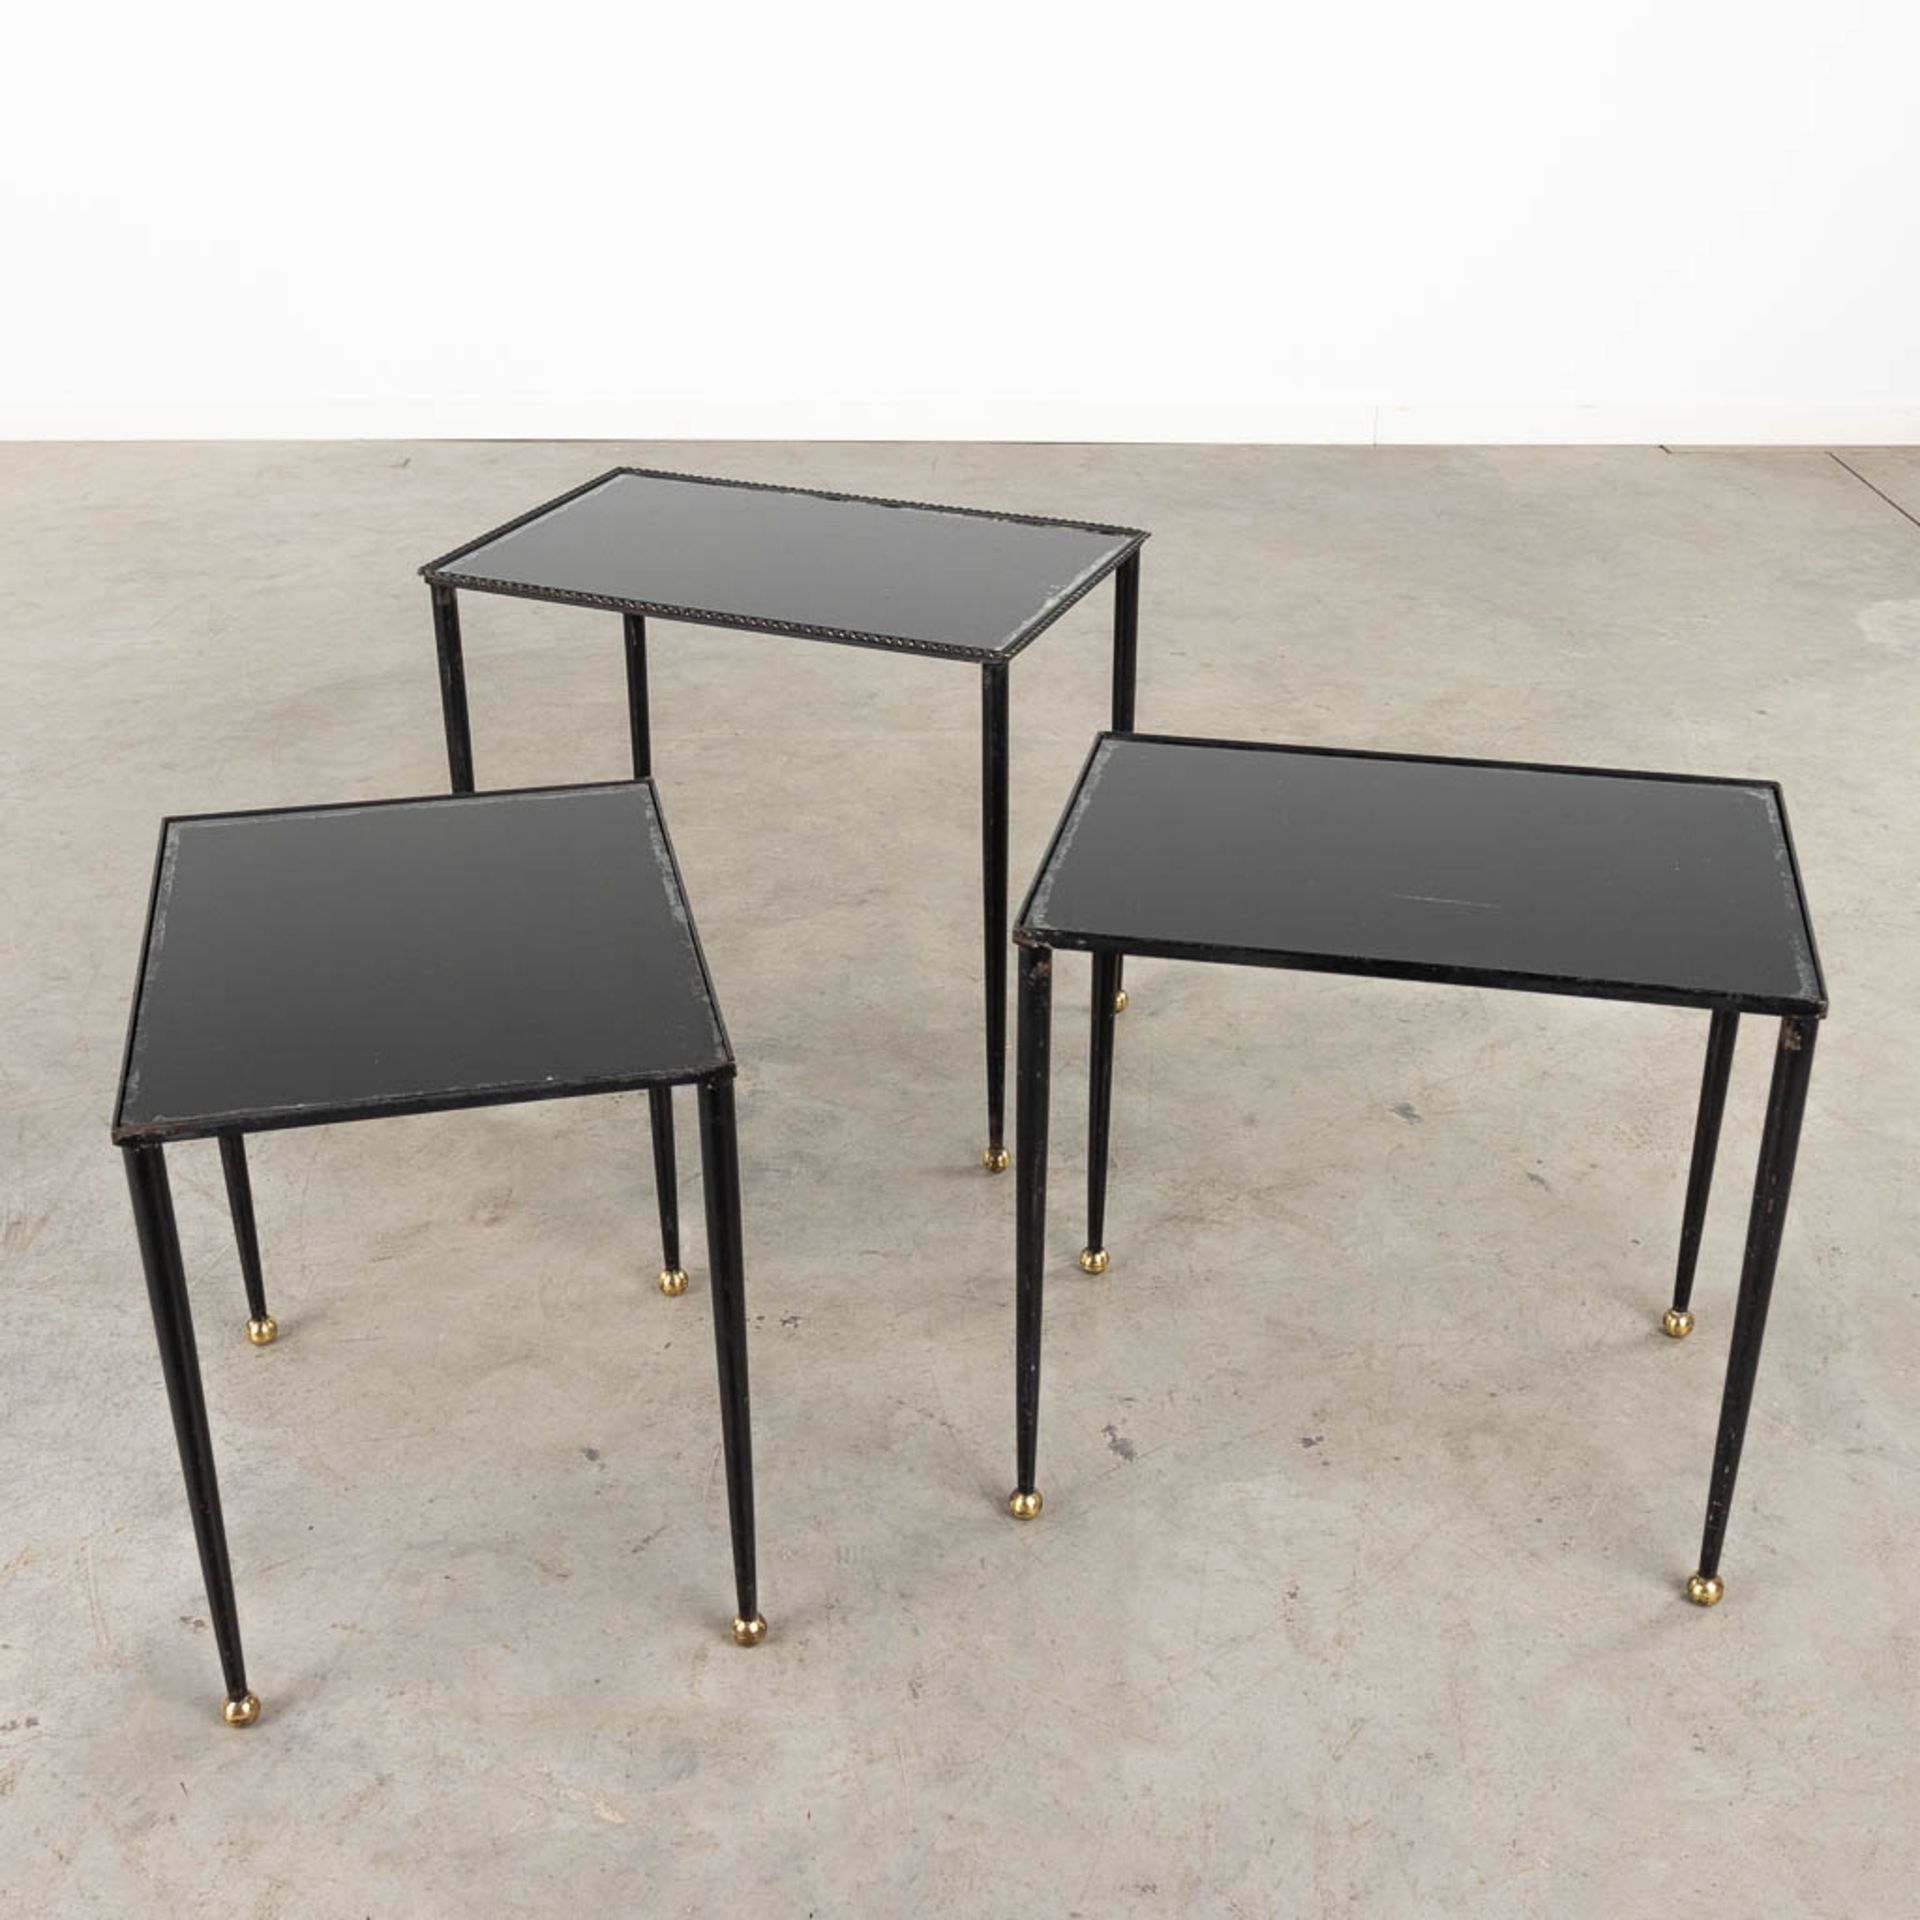 A set of Nesting tables, metal and black tinted glass. 20th C. (D:56 x W:37 x H:50 cm) - Image 3 of 10